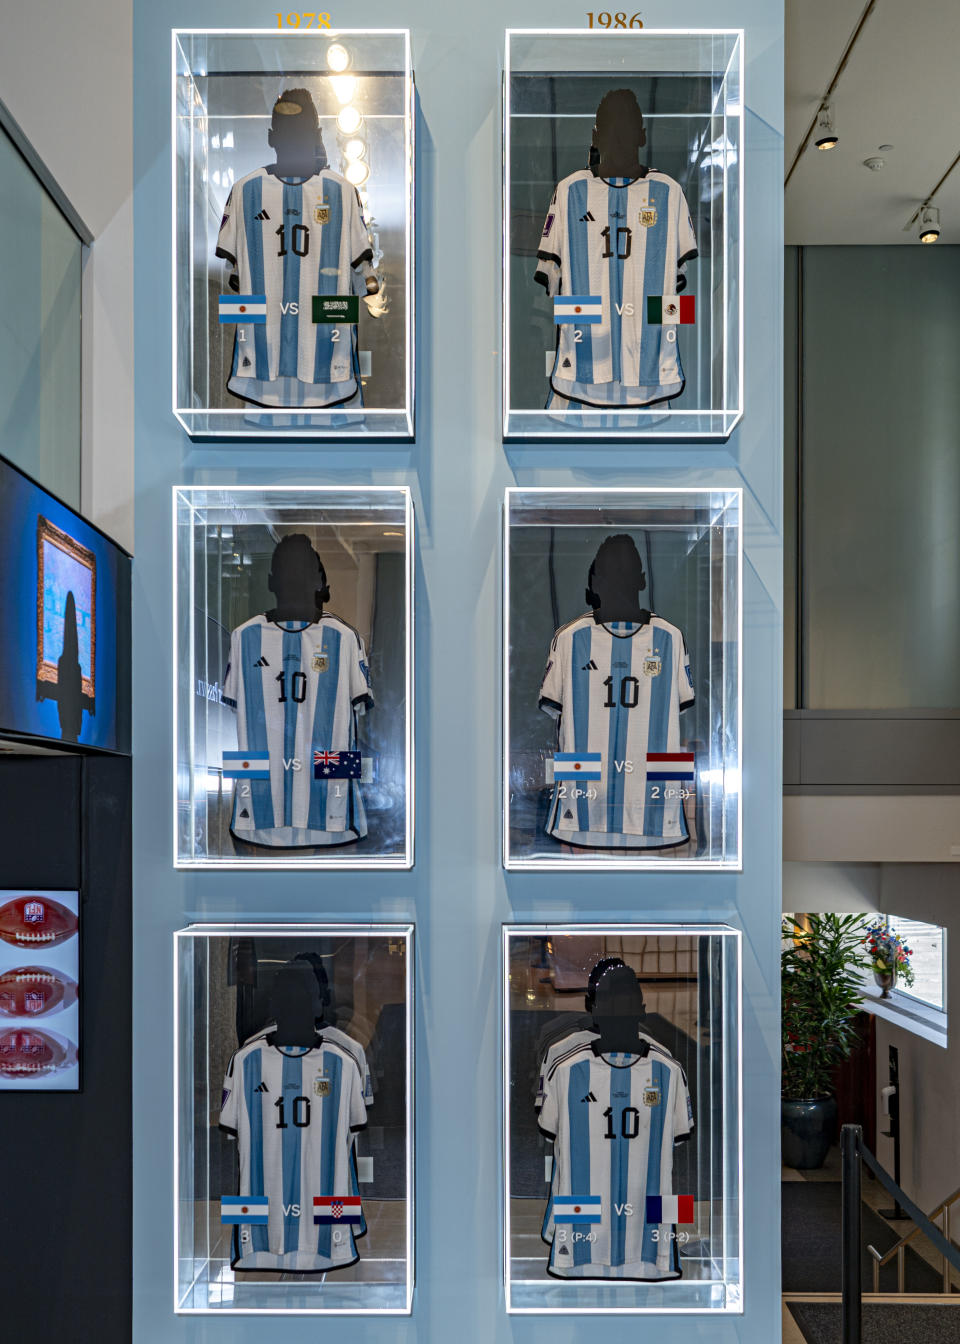 FILE - A collection of six shirts, worn by footballer Lionel Messi at the 2022 FIFA World Cup, on display at Sotheby's, Nov. 30, 2023, in New York. Six jerseys worn by Messi during Argentina’s winning run at last year’s World Cup have sold for $7.8 million. The auction house Sotheby's final price for the shirts is the highest price for an item of sports memorabilia this year, Sotheby’s said, Thursday, Dec. 14, 2023. (AP Photo/Peter K. Afriyie, file)